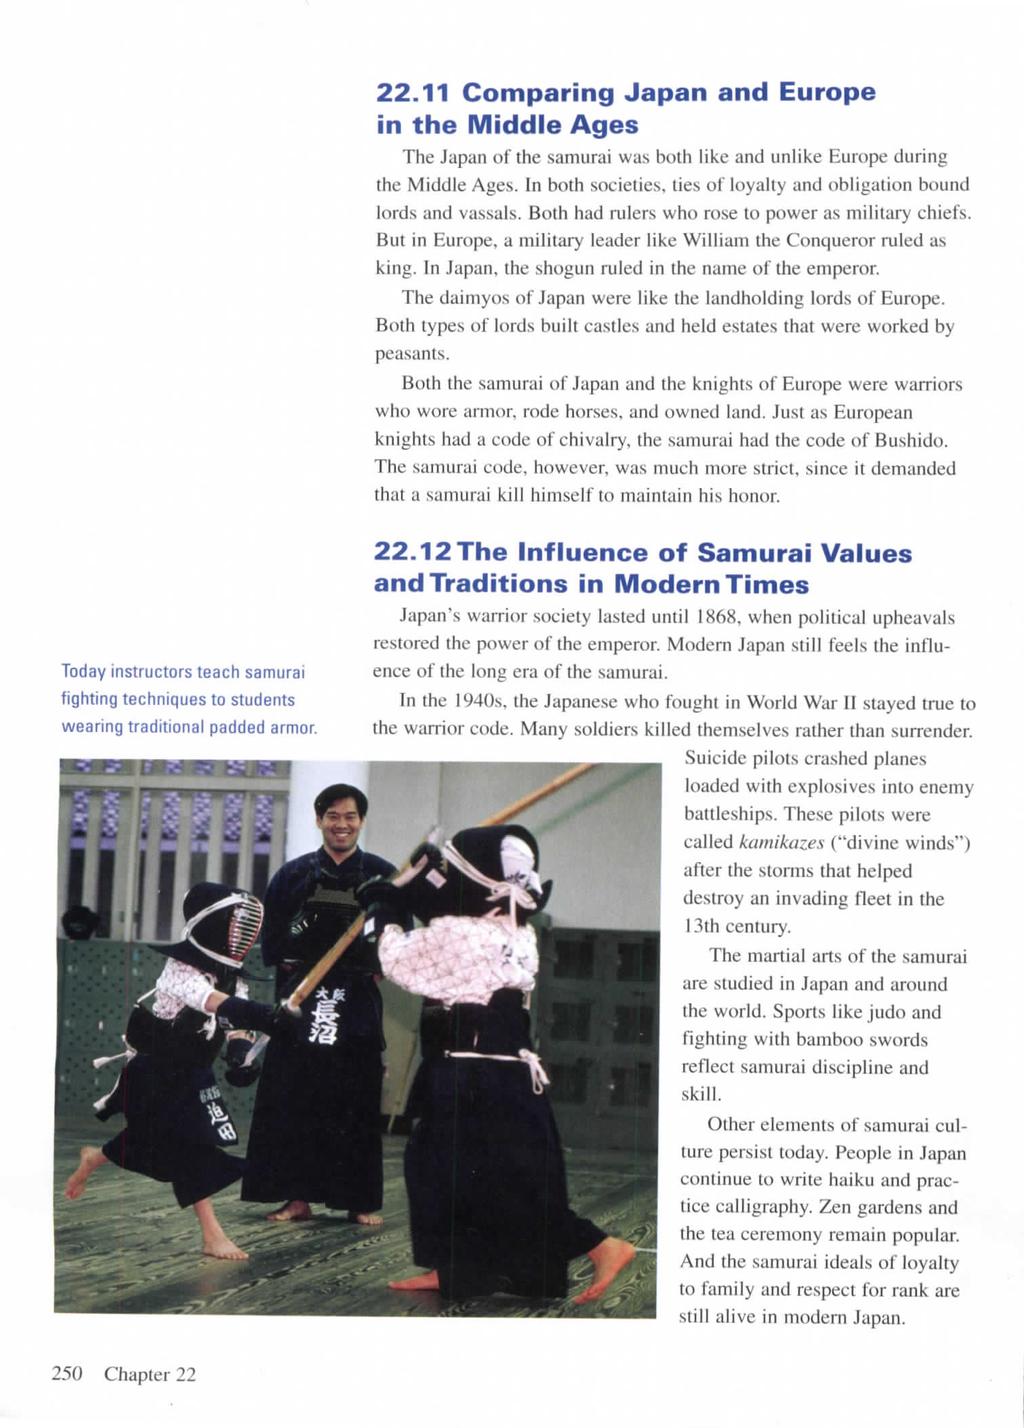 22.11 Comparing Japan and Europe in the Middle Ages The Japan of the samurai was both like and unlike Europe during the Middle Ages.